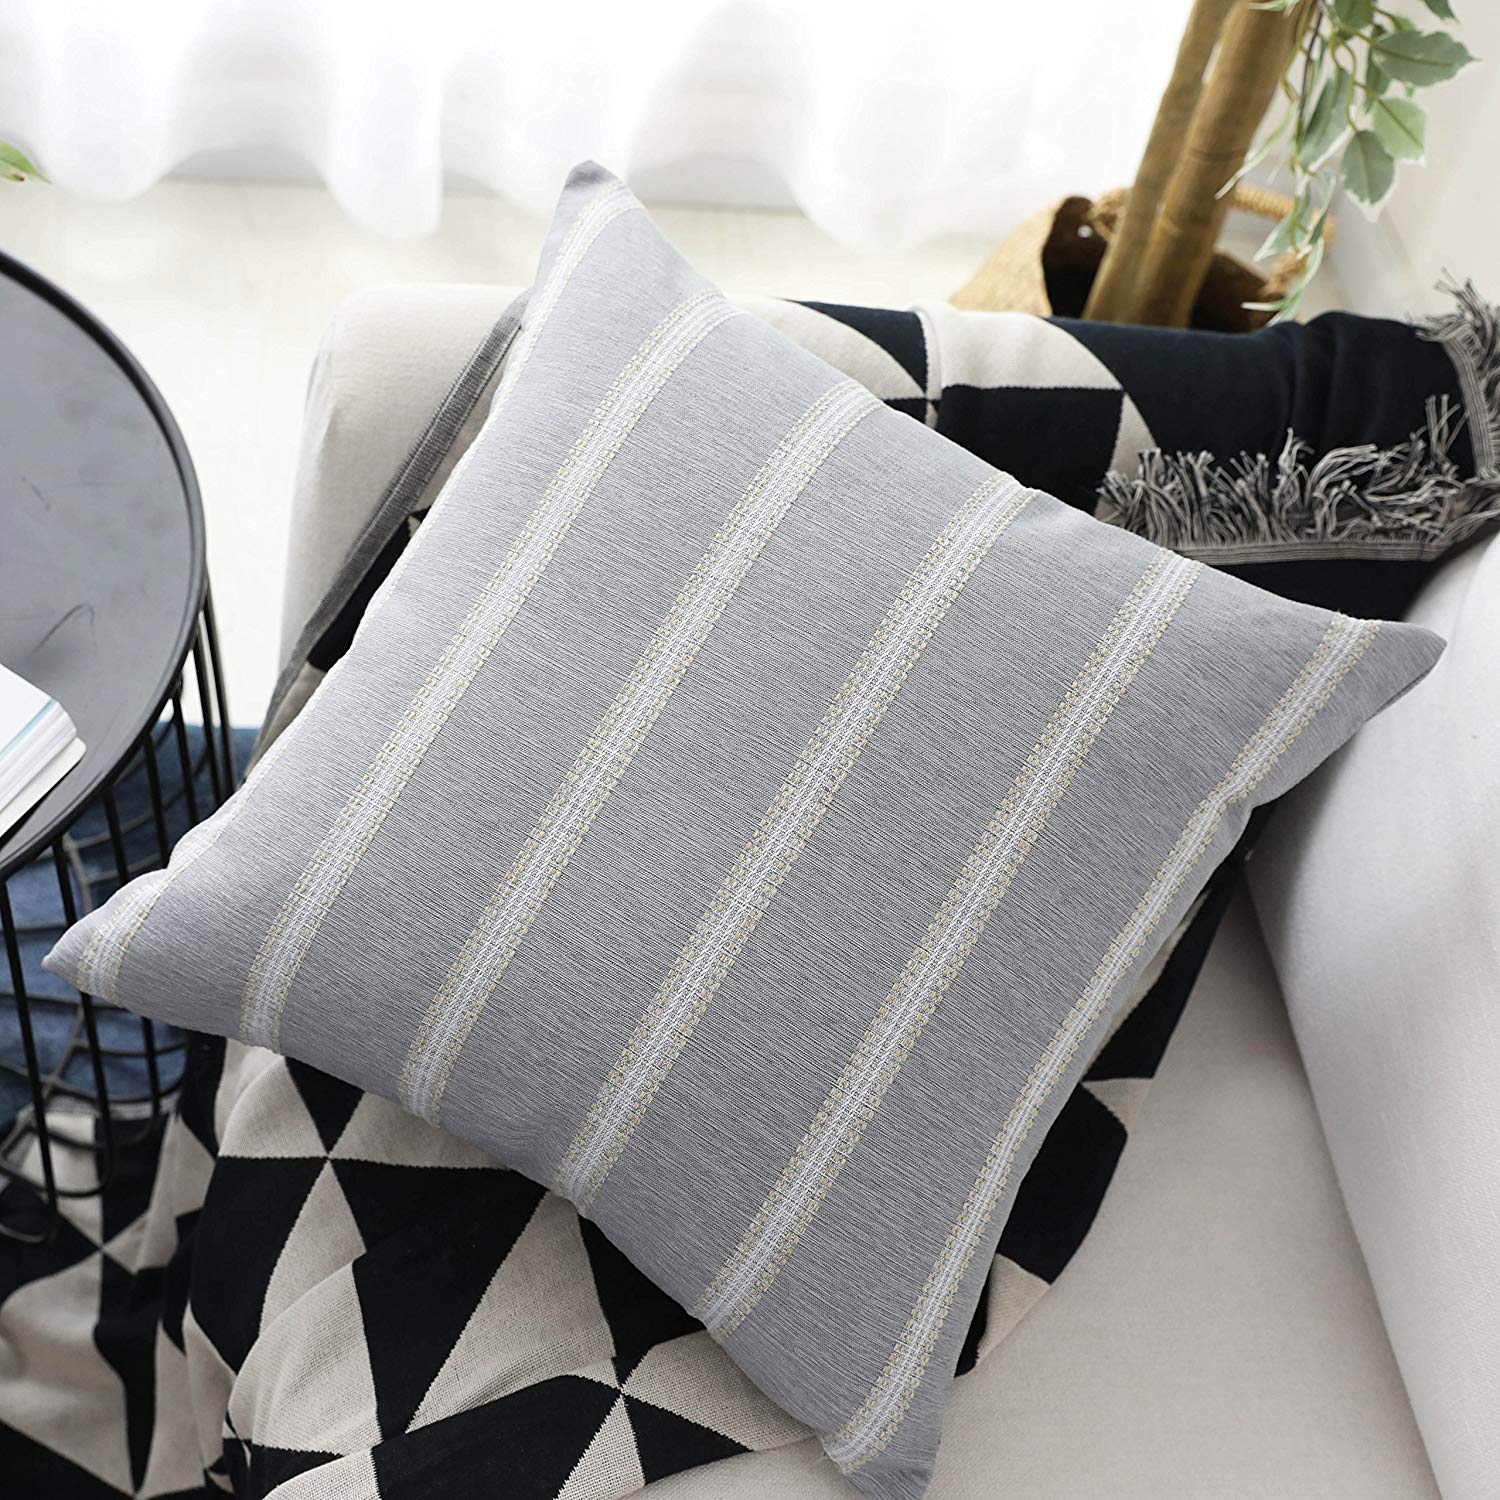 HOME BRILLIANT Decorative Throw Pillow Covers Striped Modern Farmhouse Pillowcases for Indoor Outdoor, Set of 2, 18 x 18 inches(45x45cm), Grey Gray